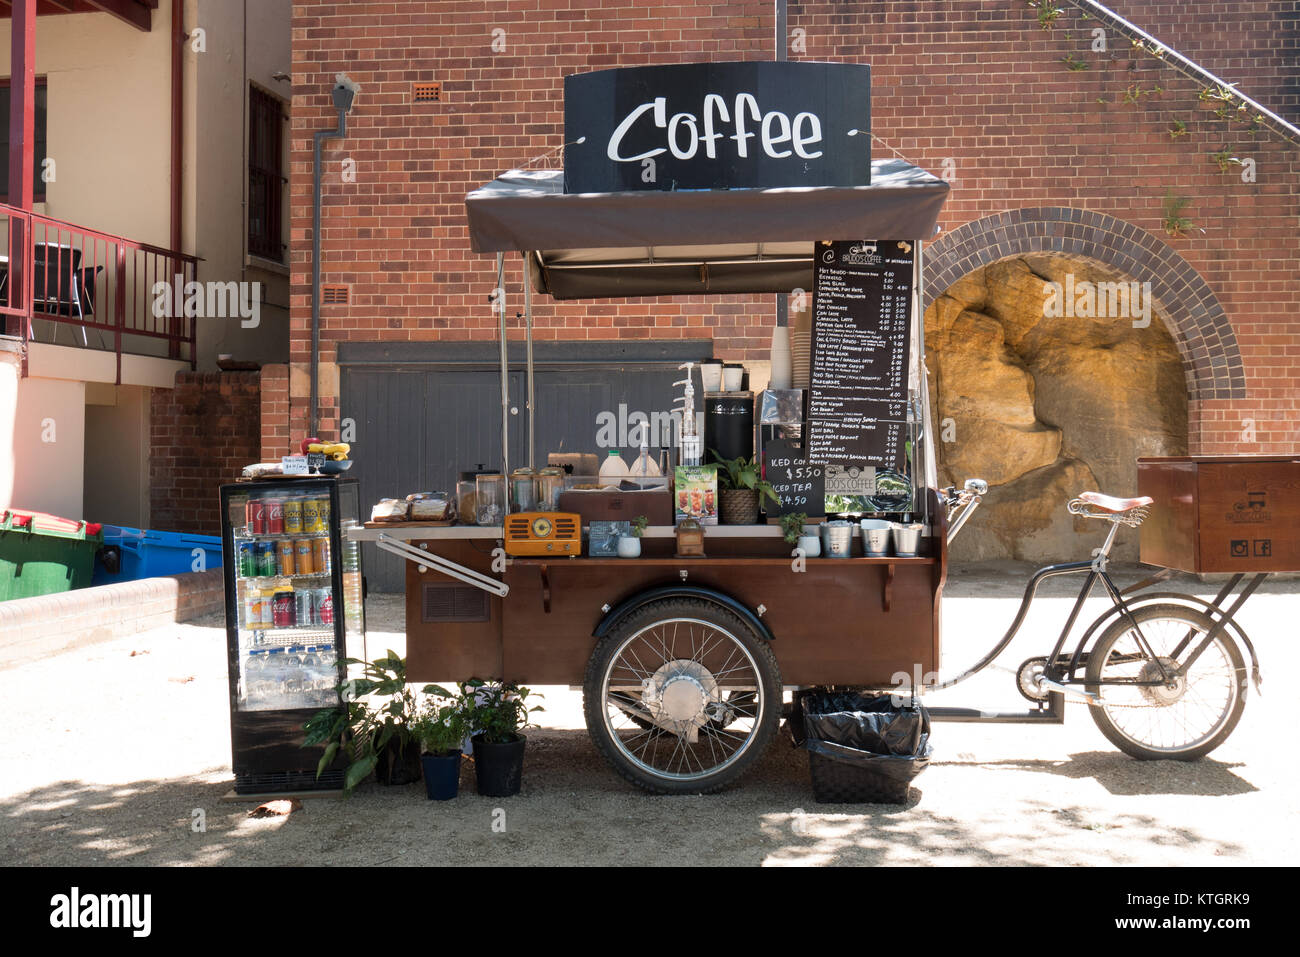 Coffee Cart High Resolution Stock Photography and Images - Alamy